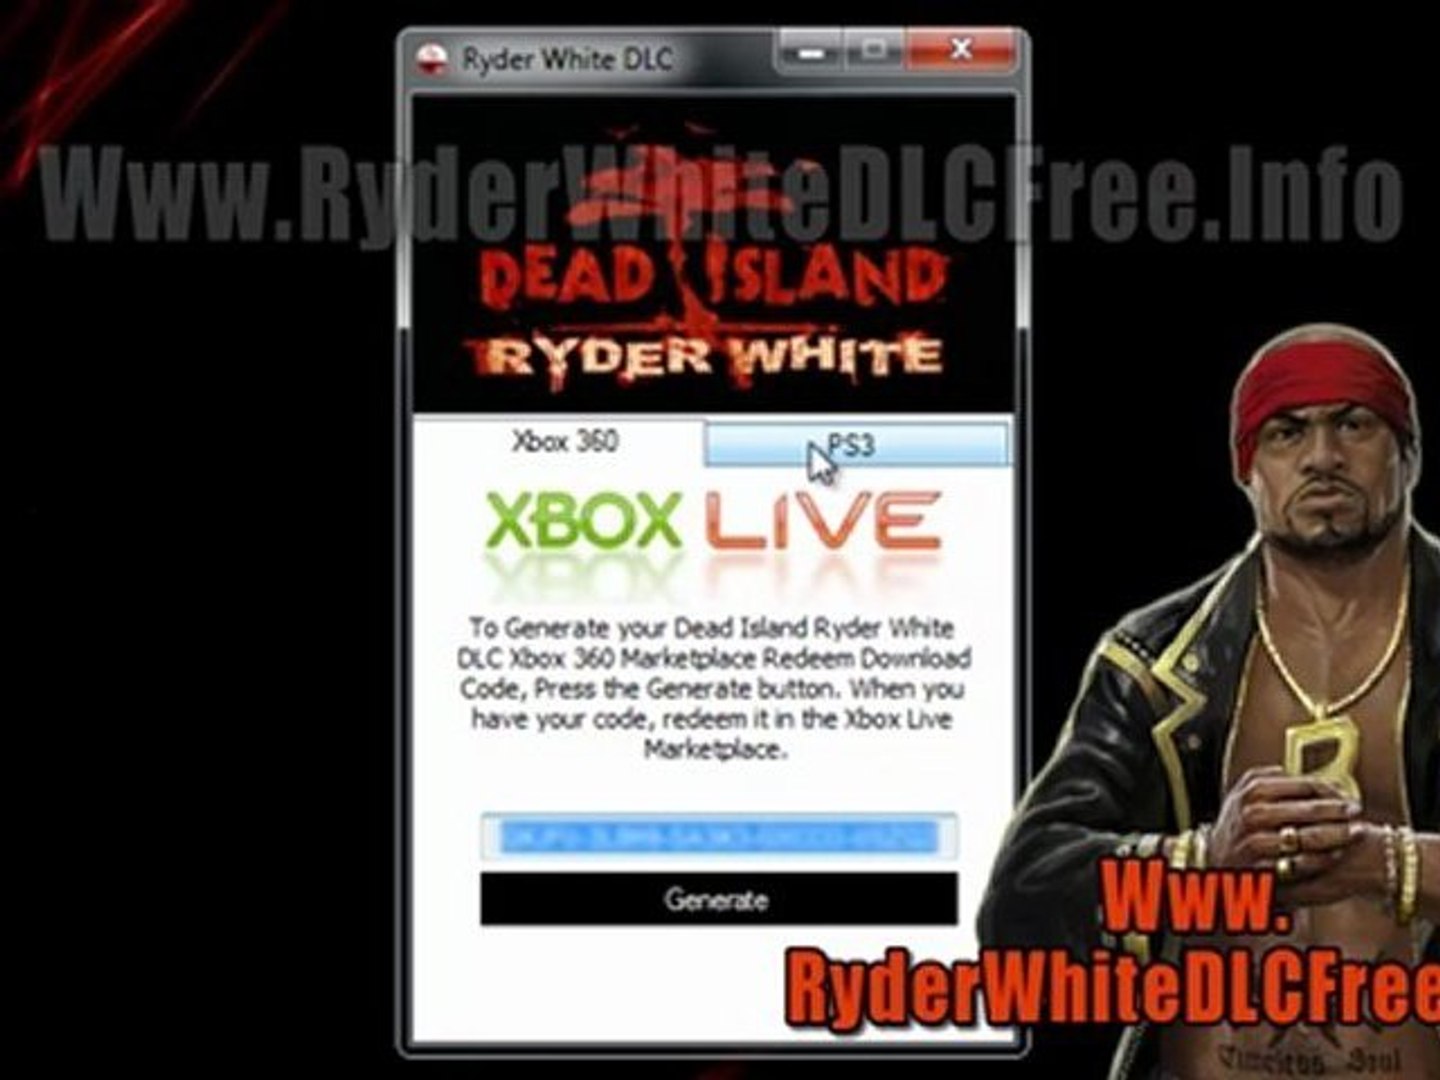 Dead Island Ryder White DLC Code Free Download - Xbox 360 - PS3 - video  Dailymotion